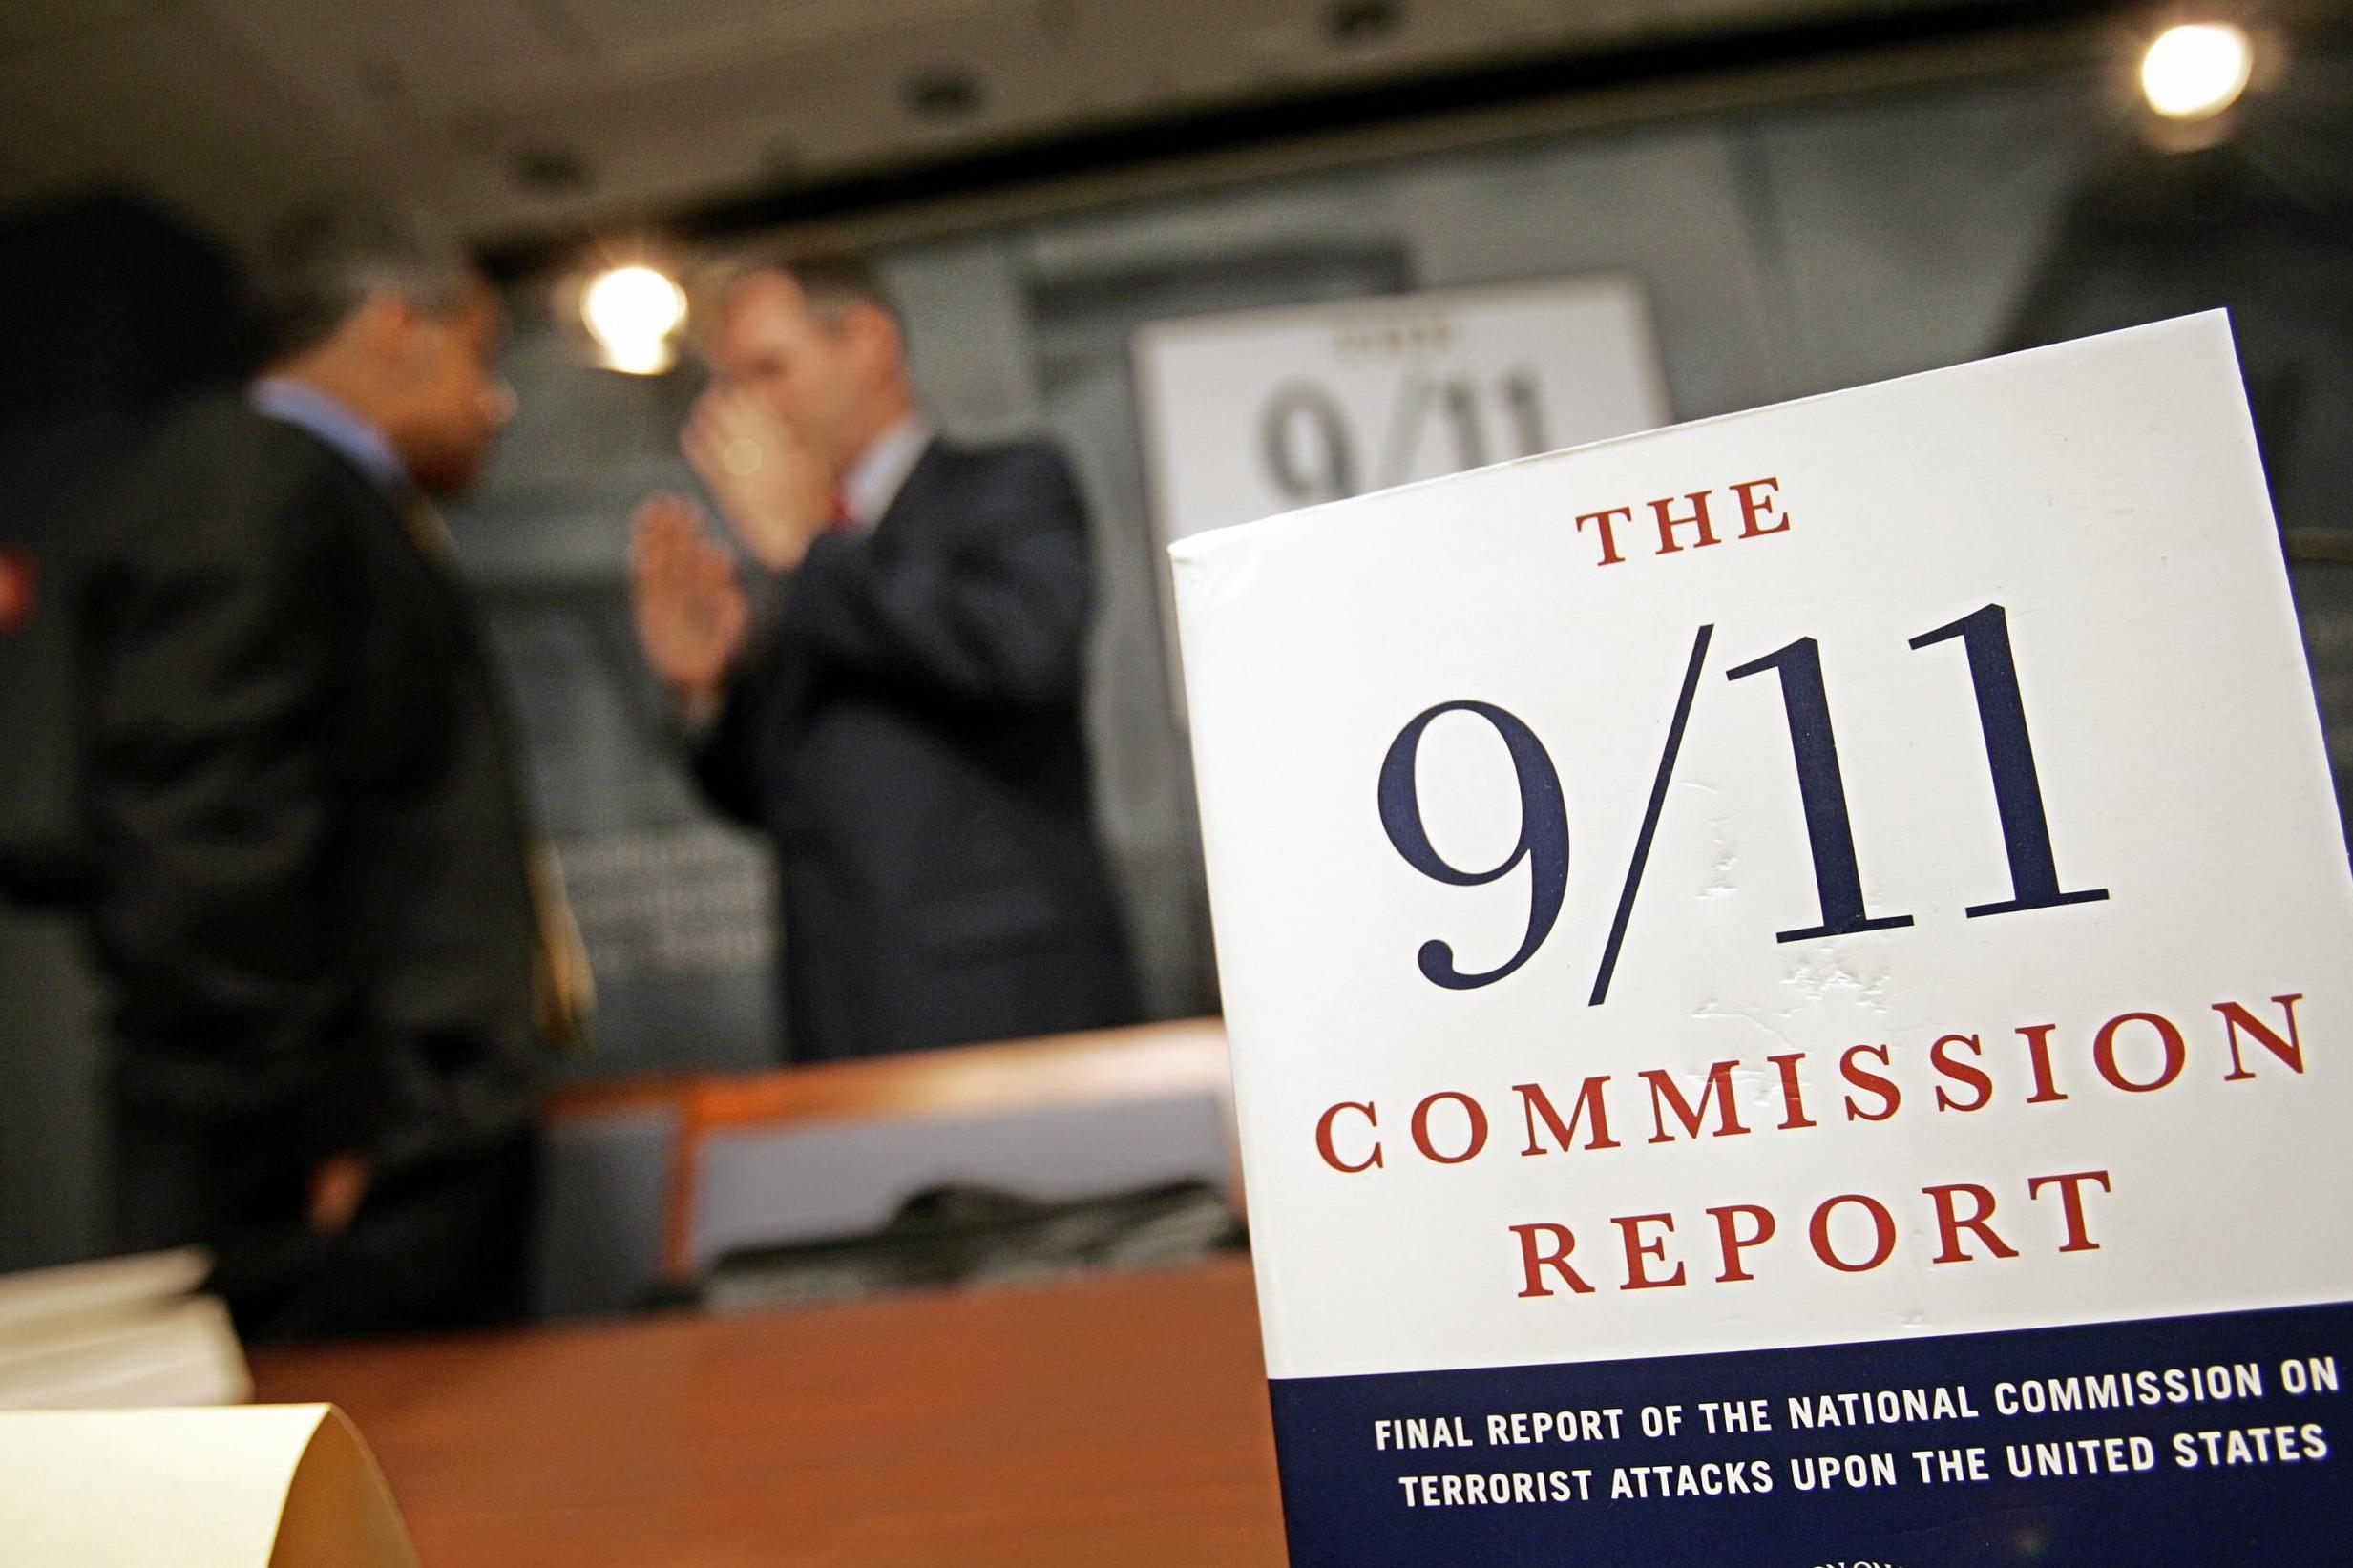 Two authors of the 9/11 Commission Report, issued 28 June 2005, warn of the risk of another terrorist attack on the US